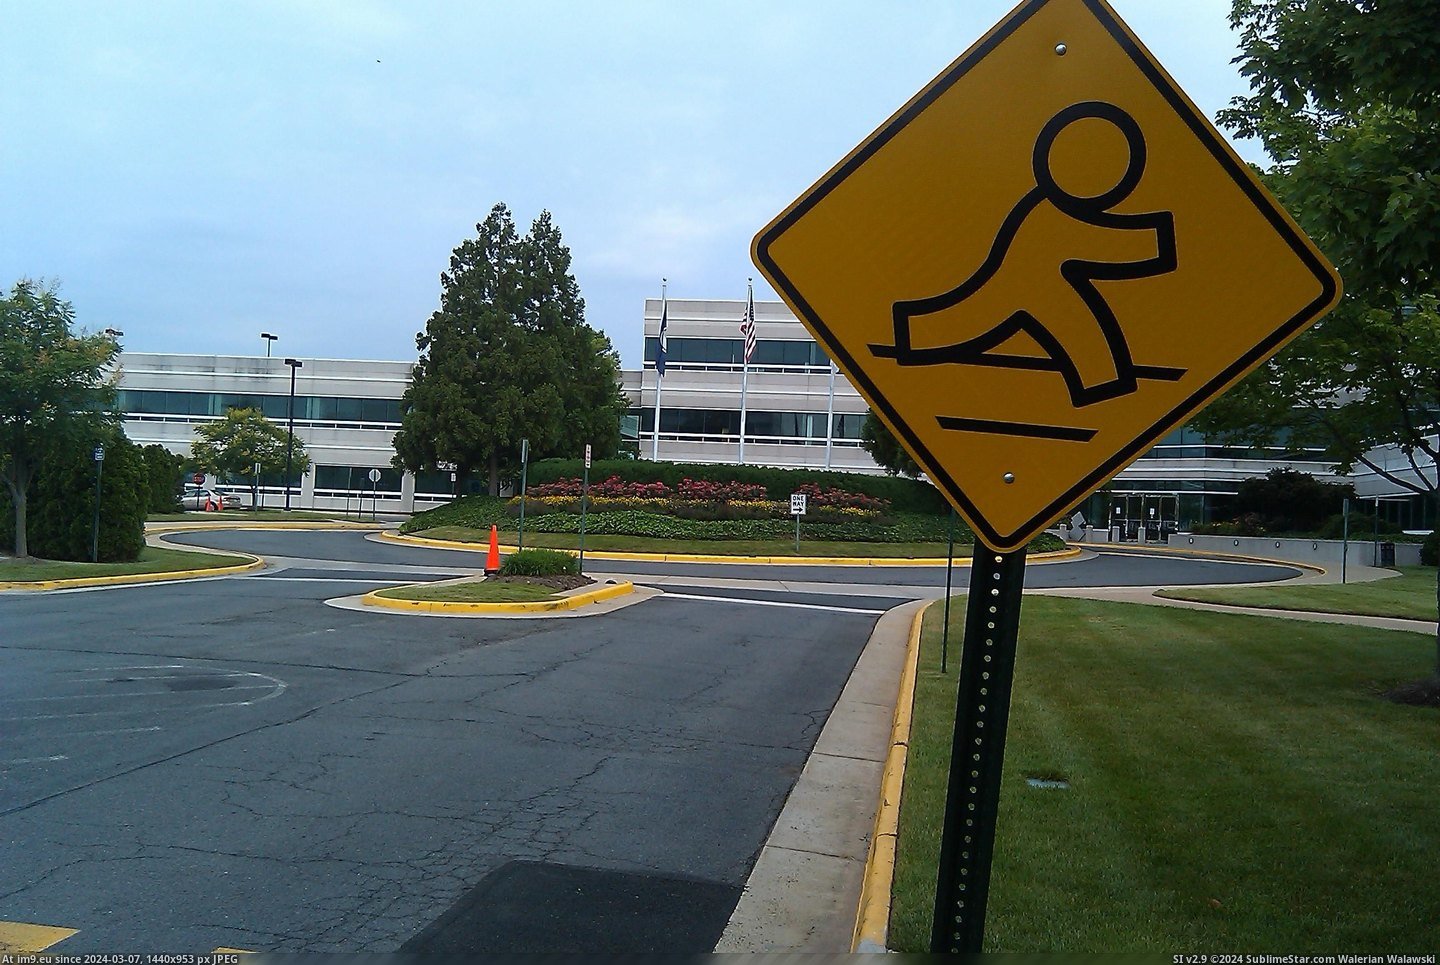 #Office #Signs #Corporate #Aol #Campus #Pedestrian [Mildlyinteresting] Pedestrian signs at an AOL corporate office campus. Pic. (Изображение из альбом My r/MILDLYINTERESTING favs))